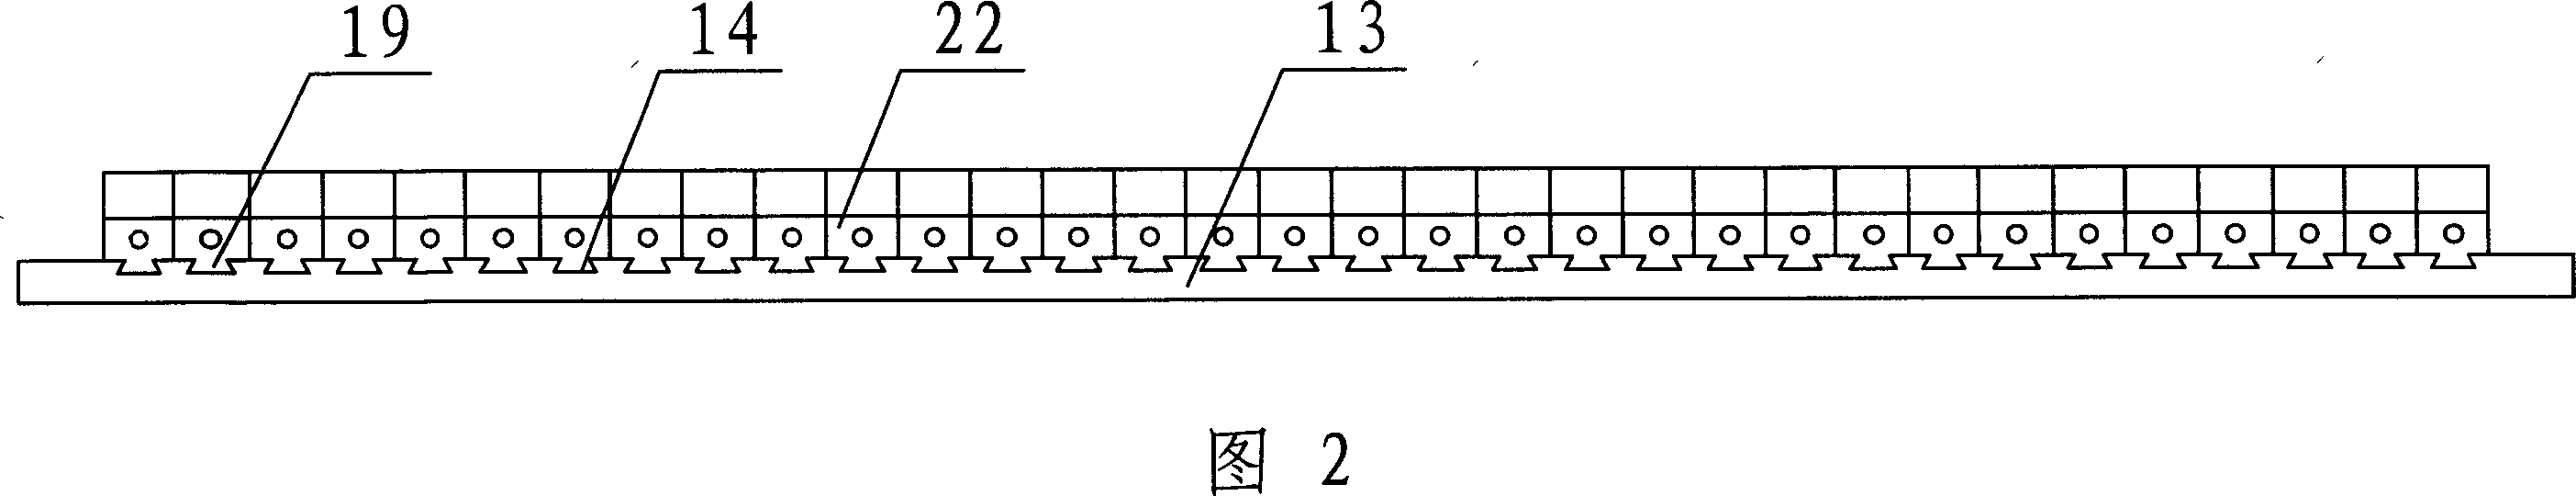 Bearing channel automatic sorting linear transport mechanism